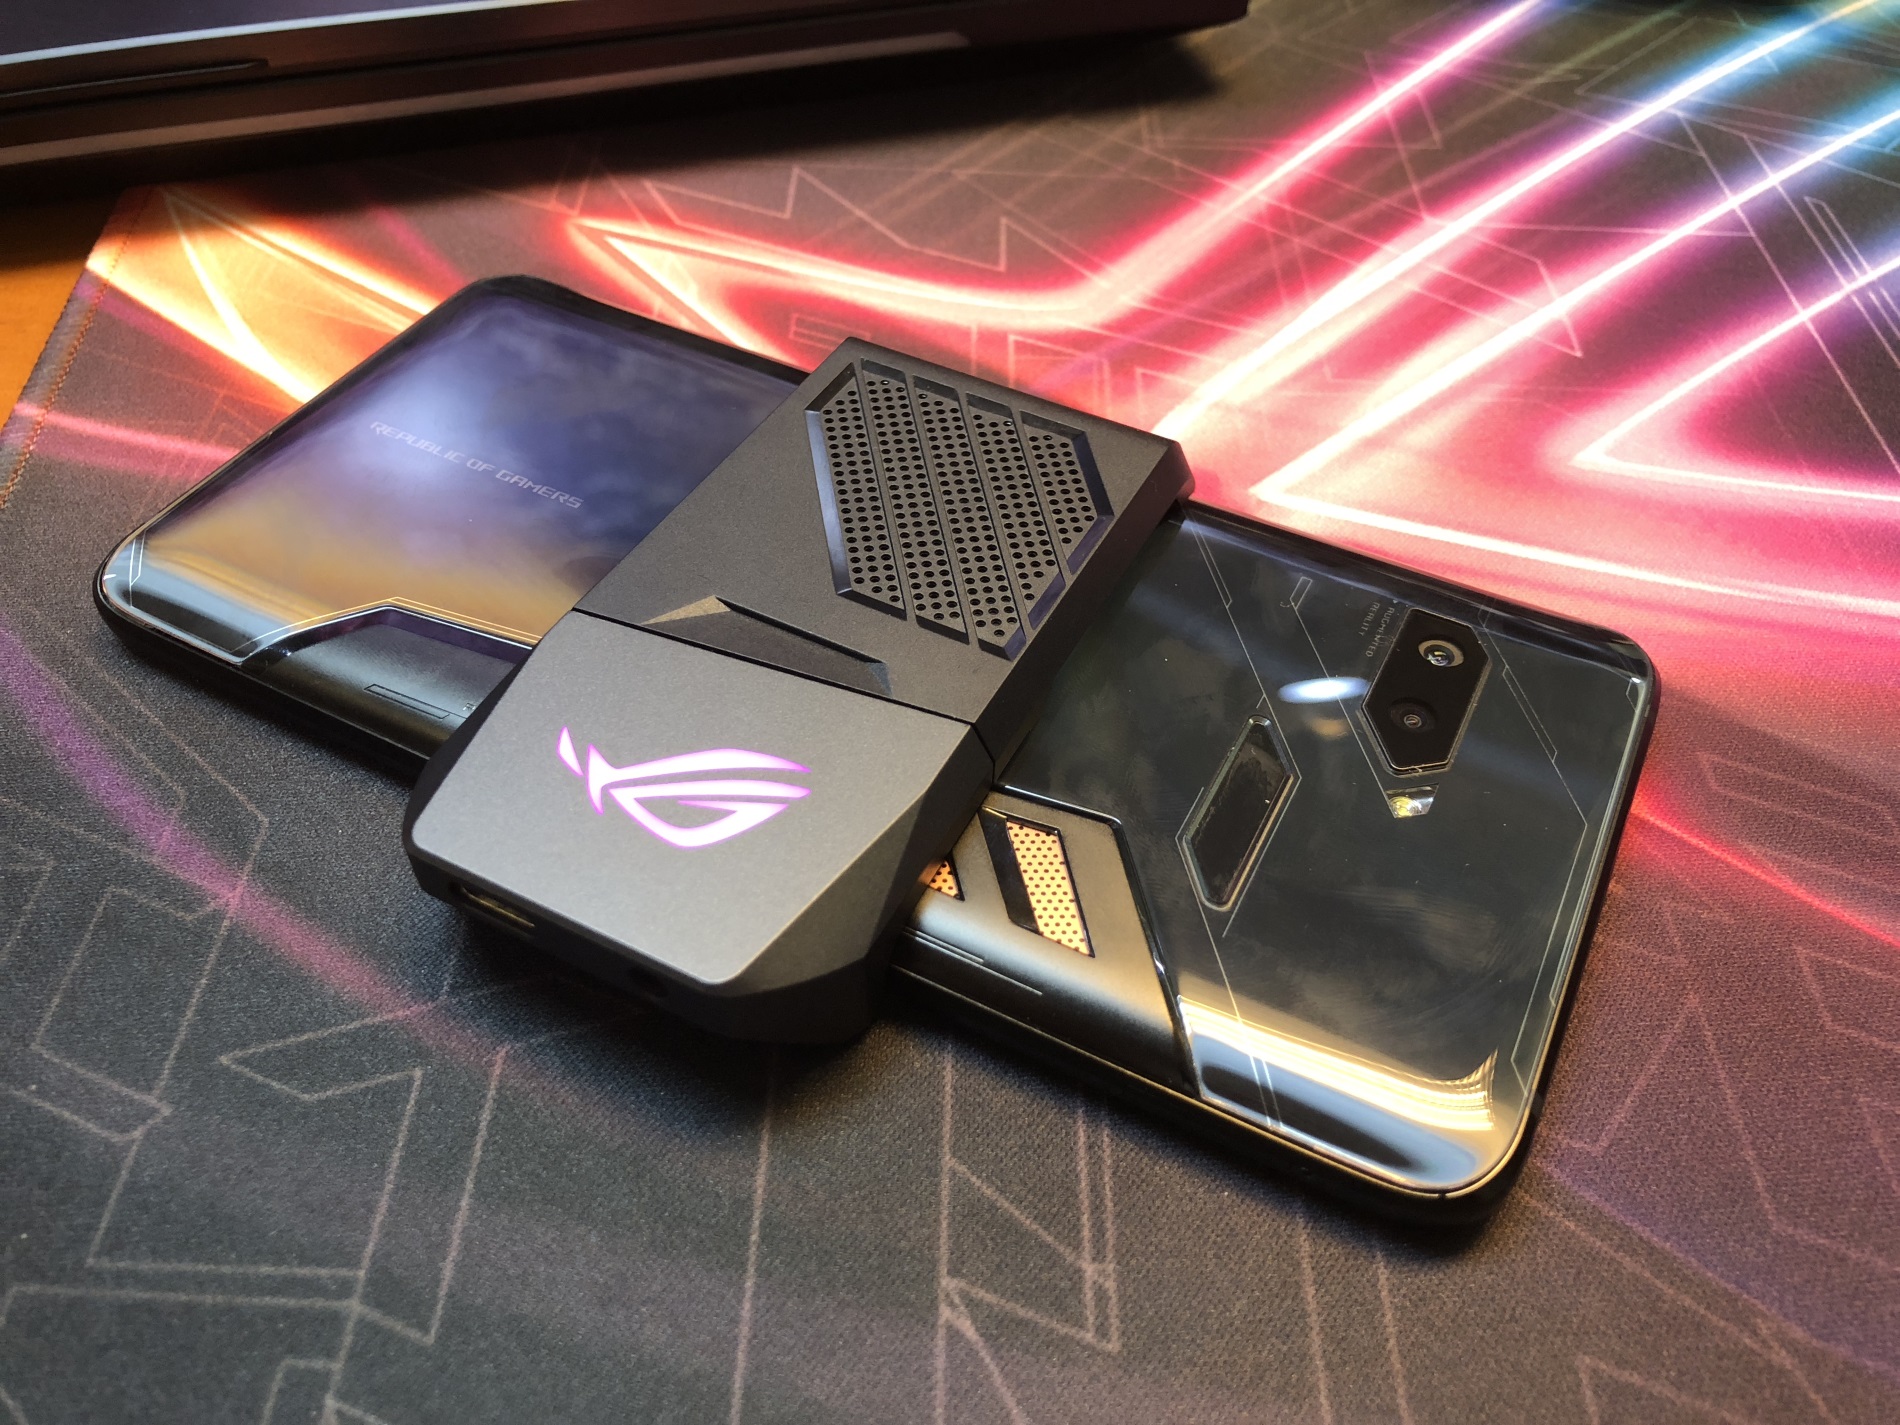 Asus RoG PHone active cooling